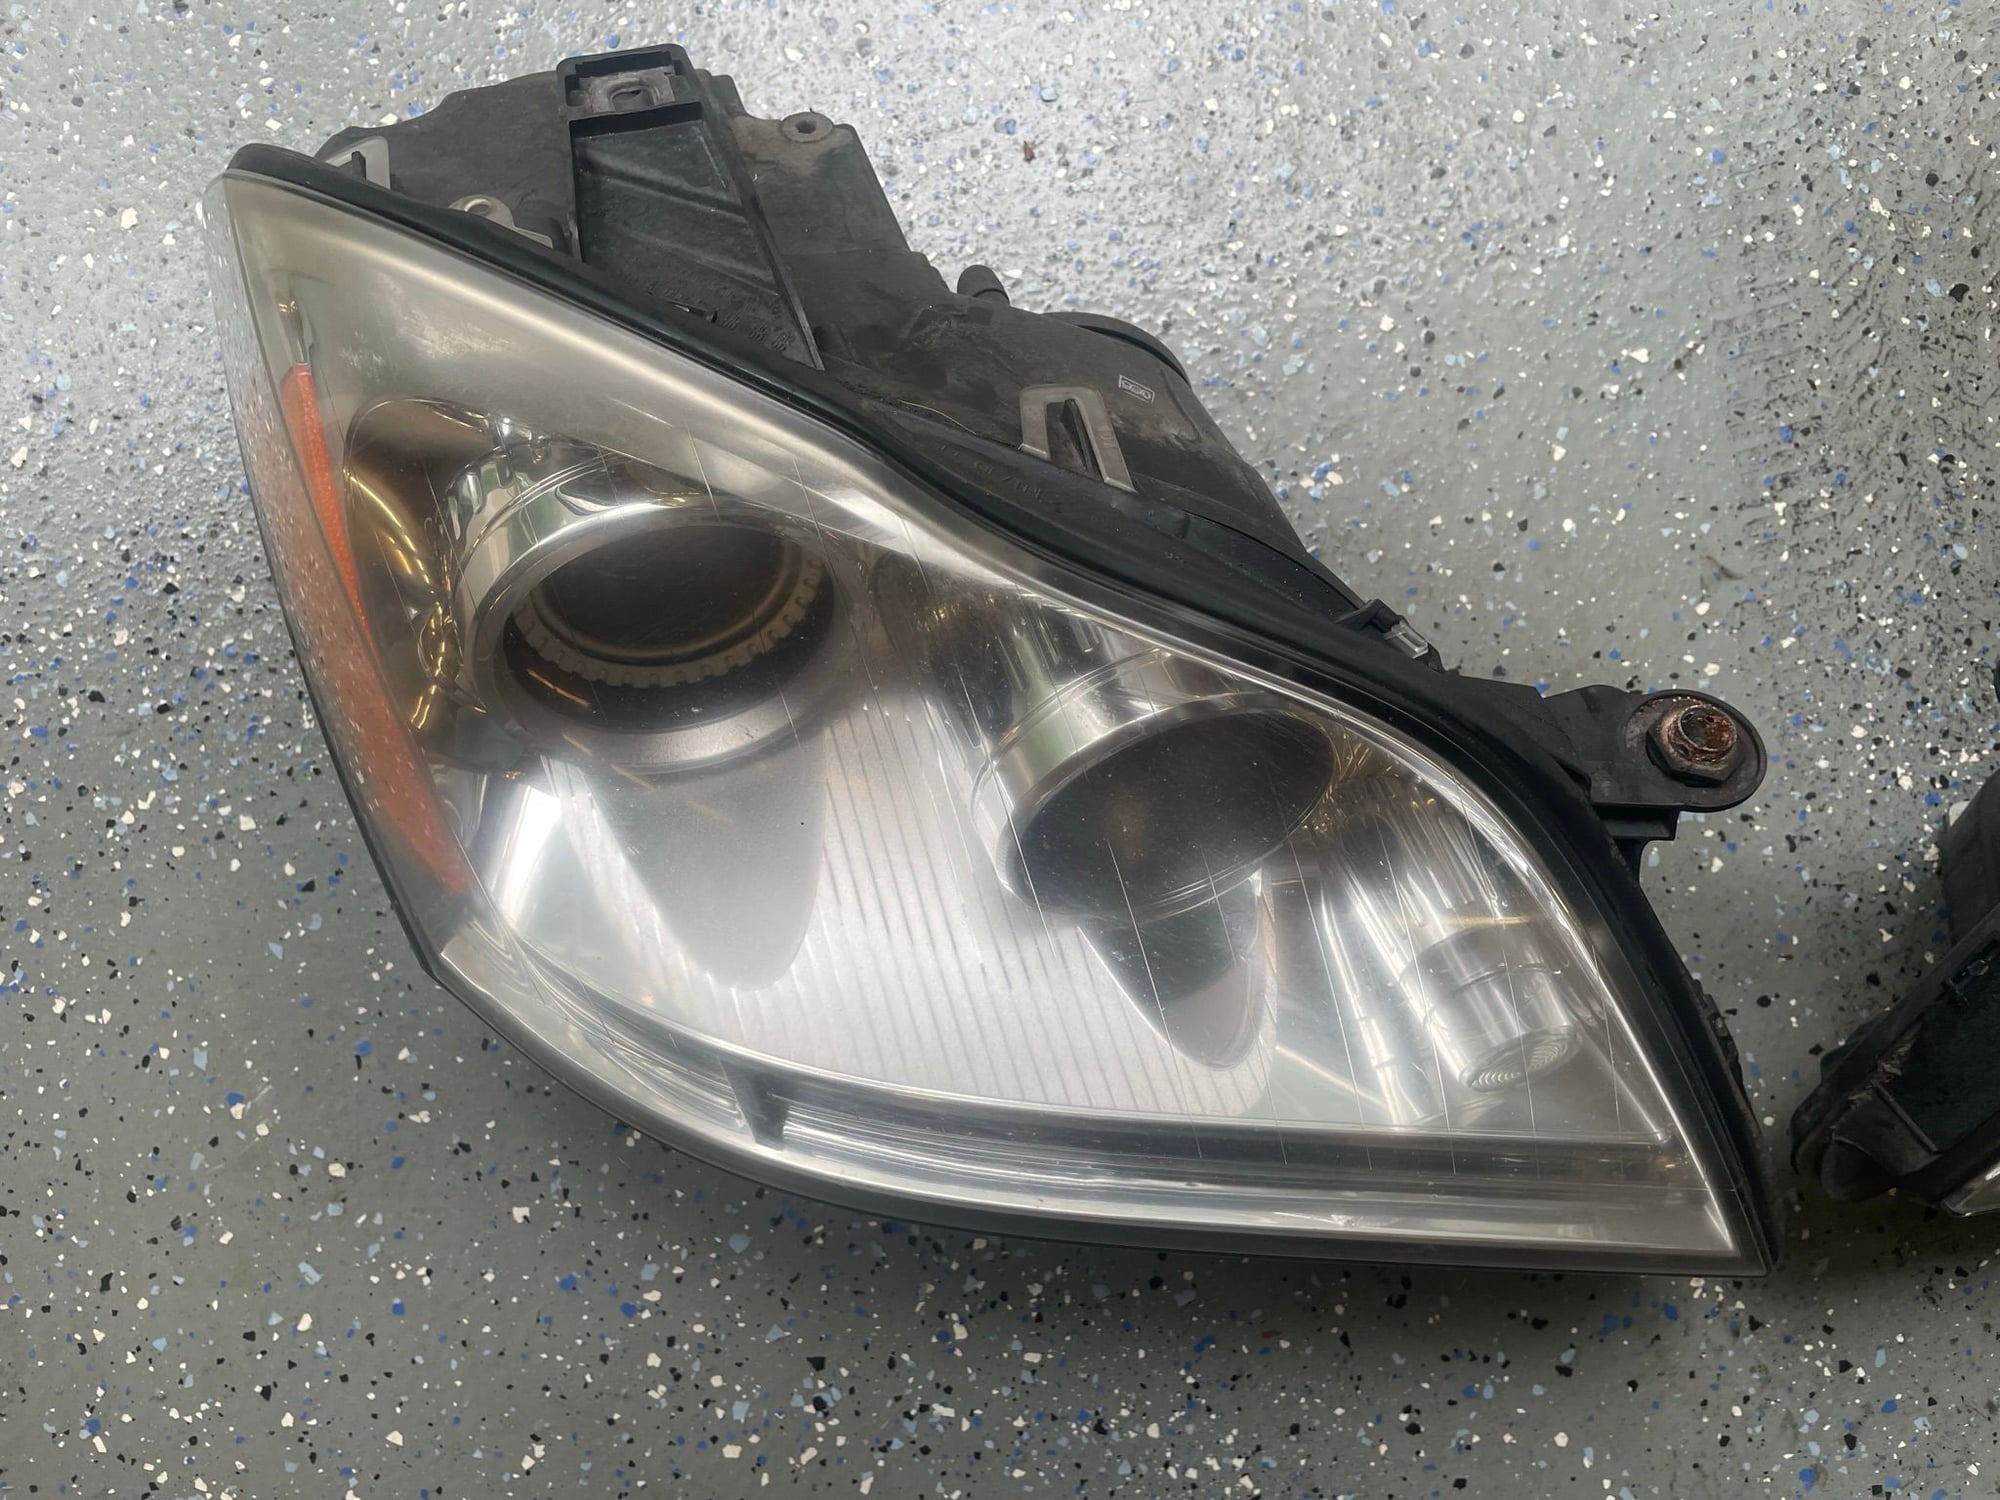 Lights - Mercedes Benz X164 Xenon Headlights 100% working condition Used - Used - 2010 to 2012 Mercedes-Benz GL550 - Chesterfield, VA 23838, United States